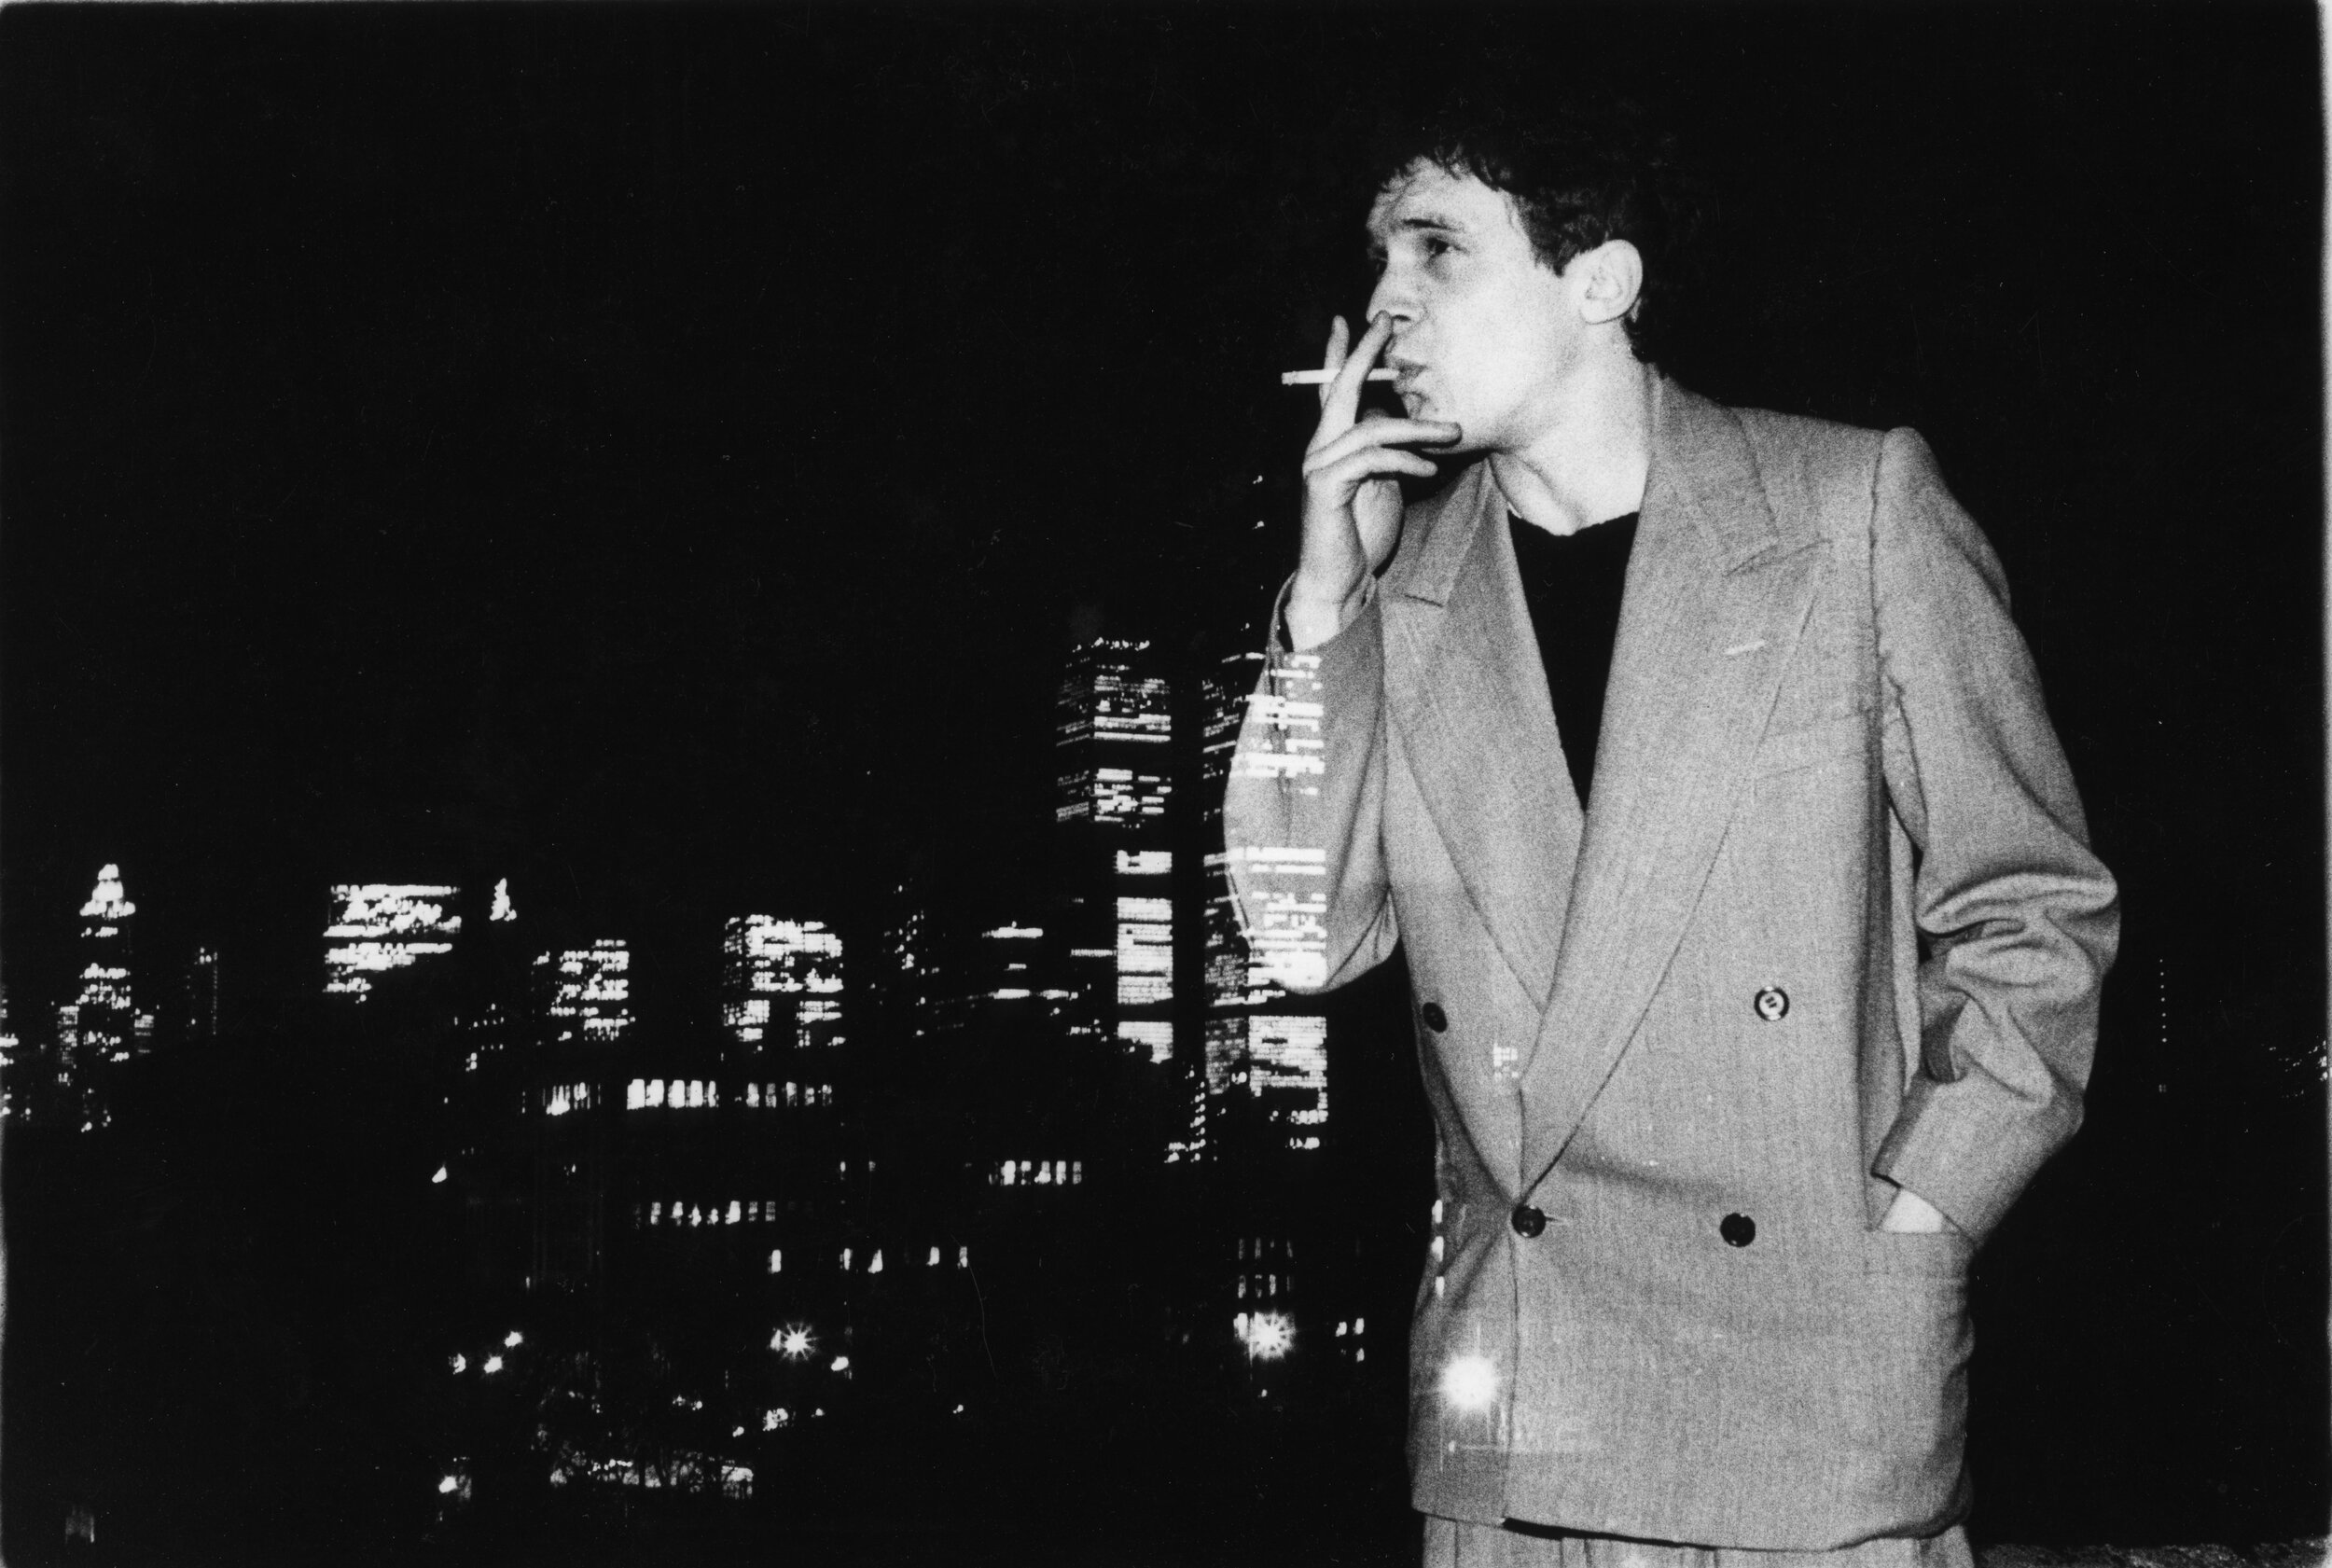 Roof top photo session NYC, 1985 